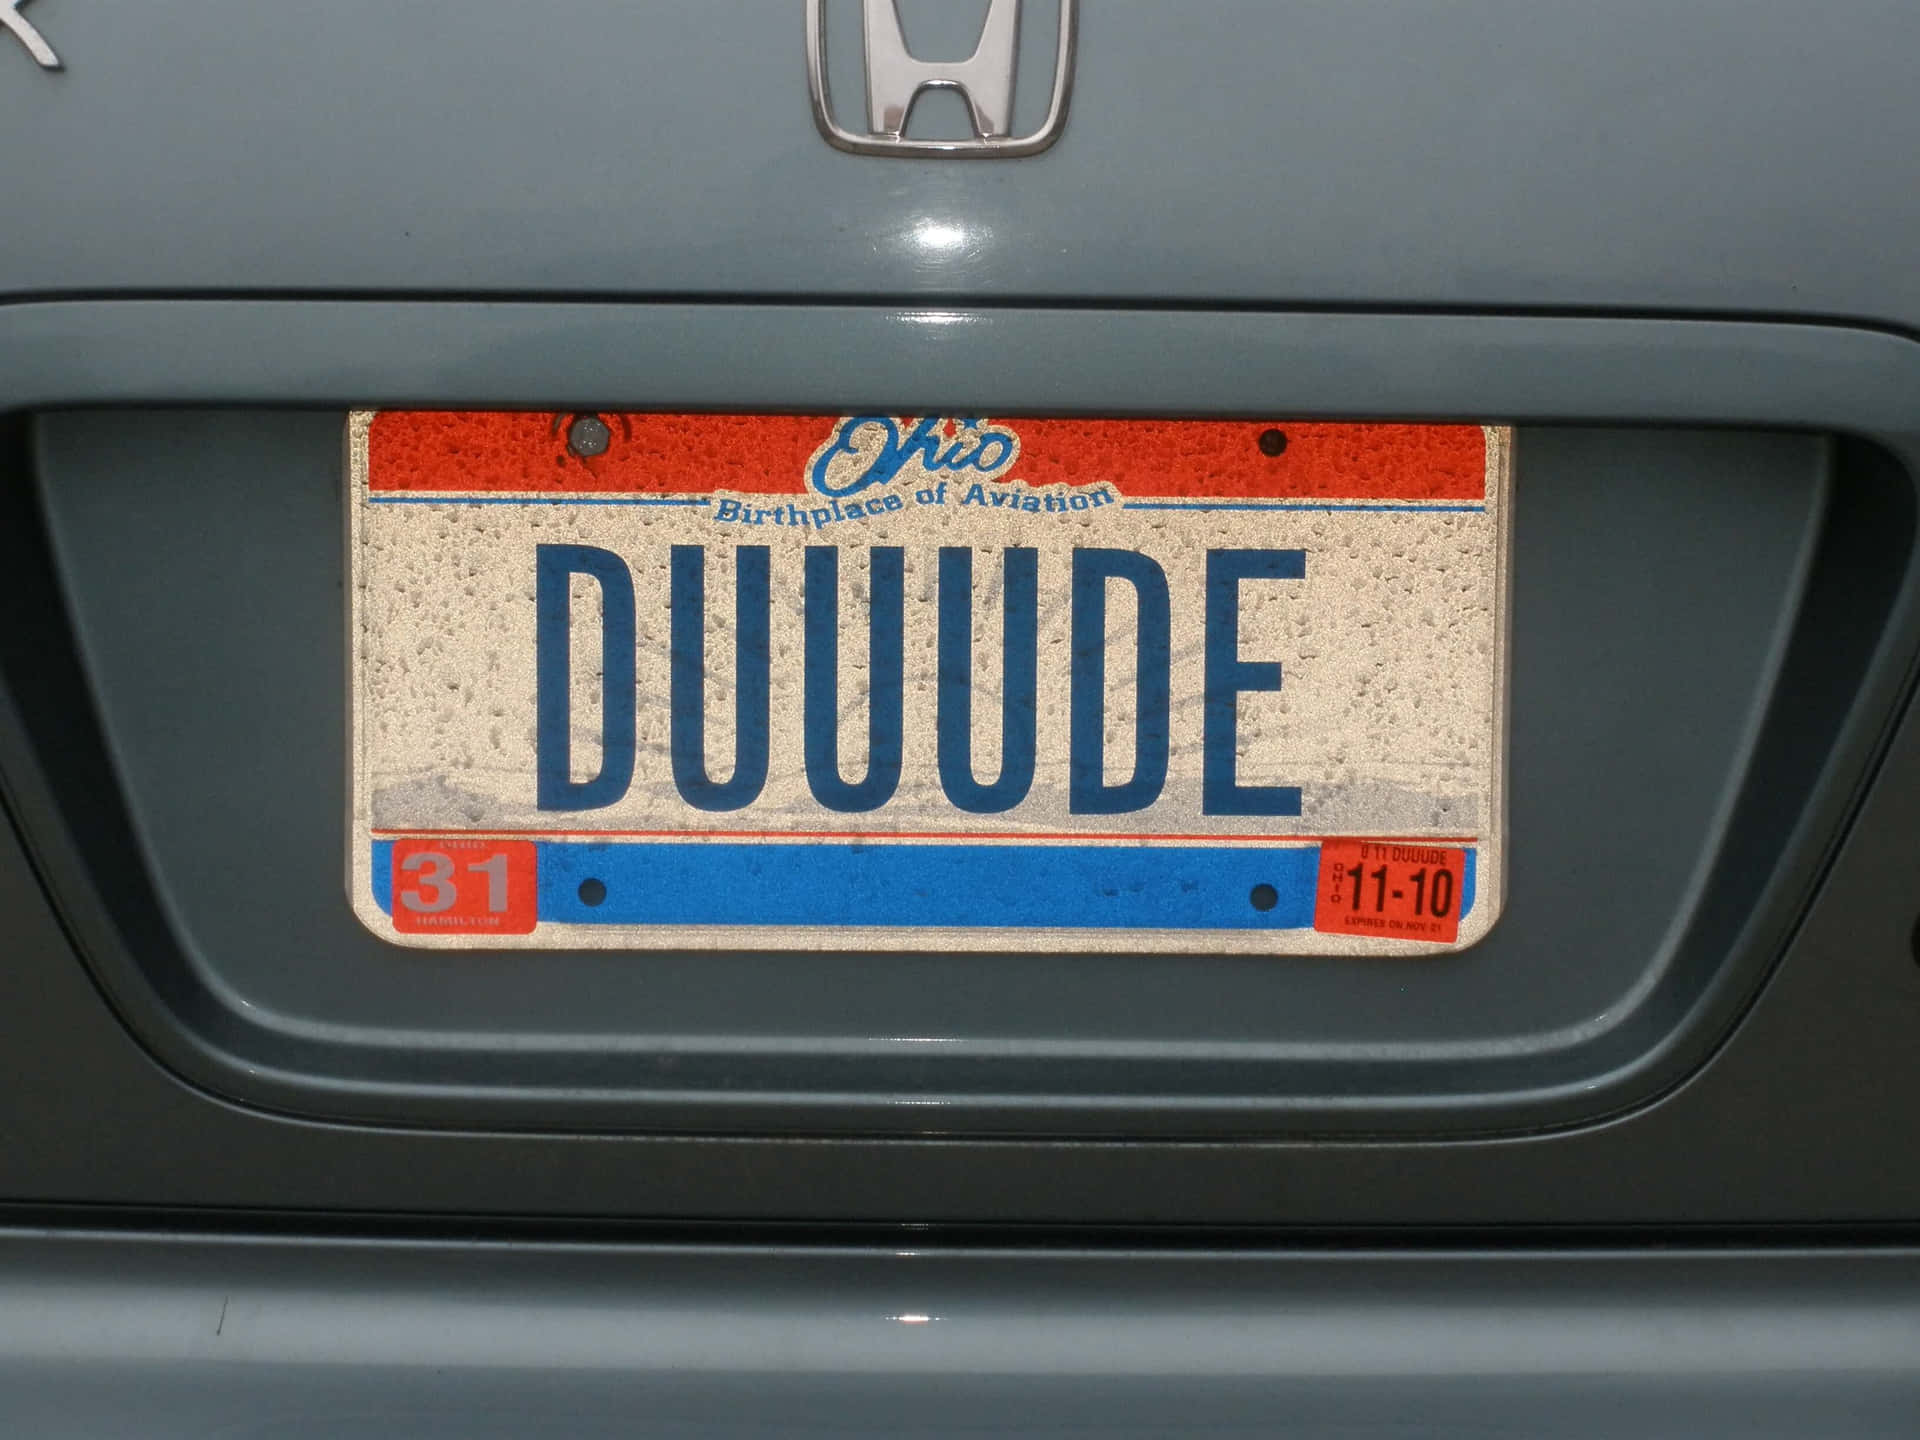 A License Plate On A Car